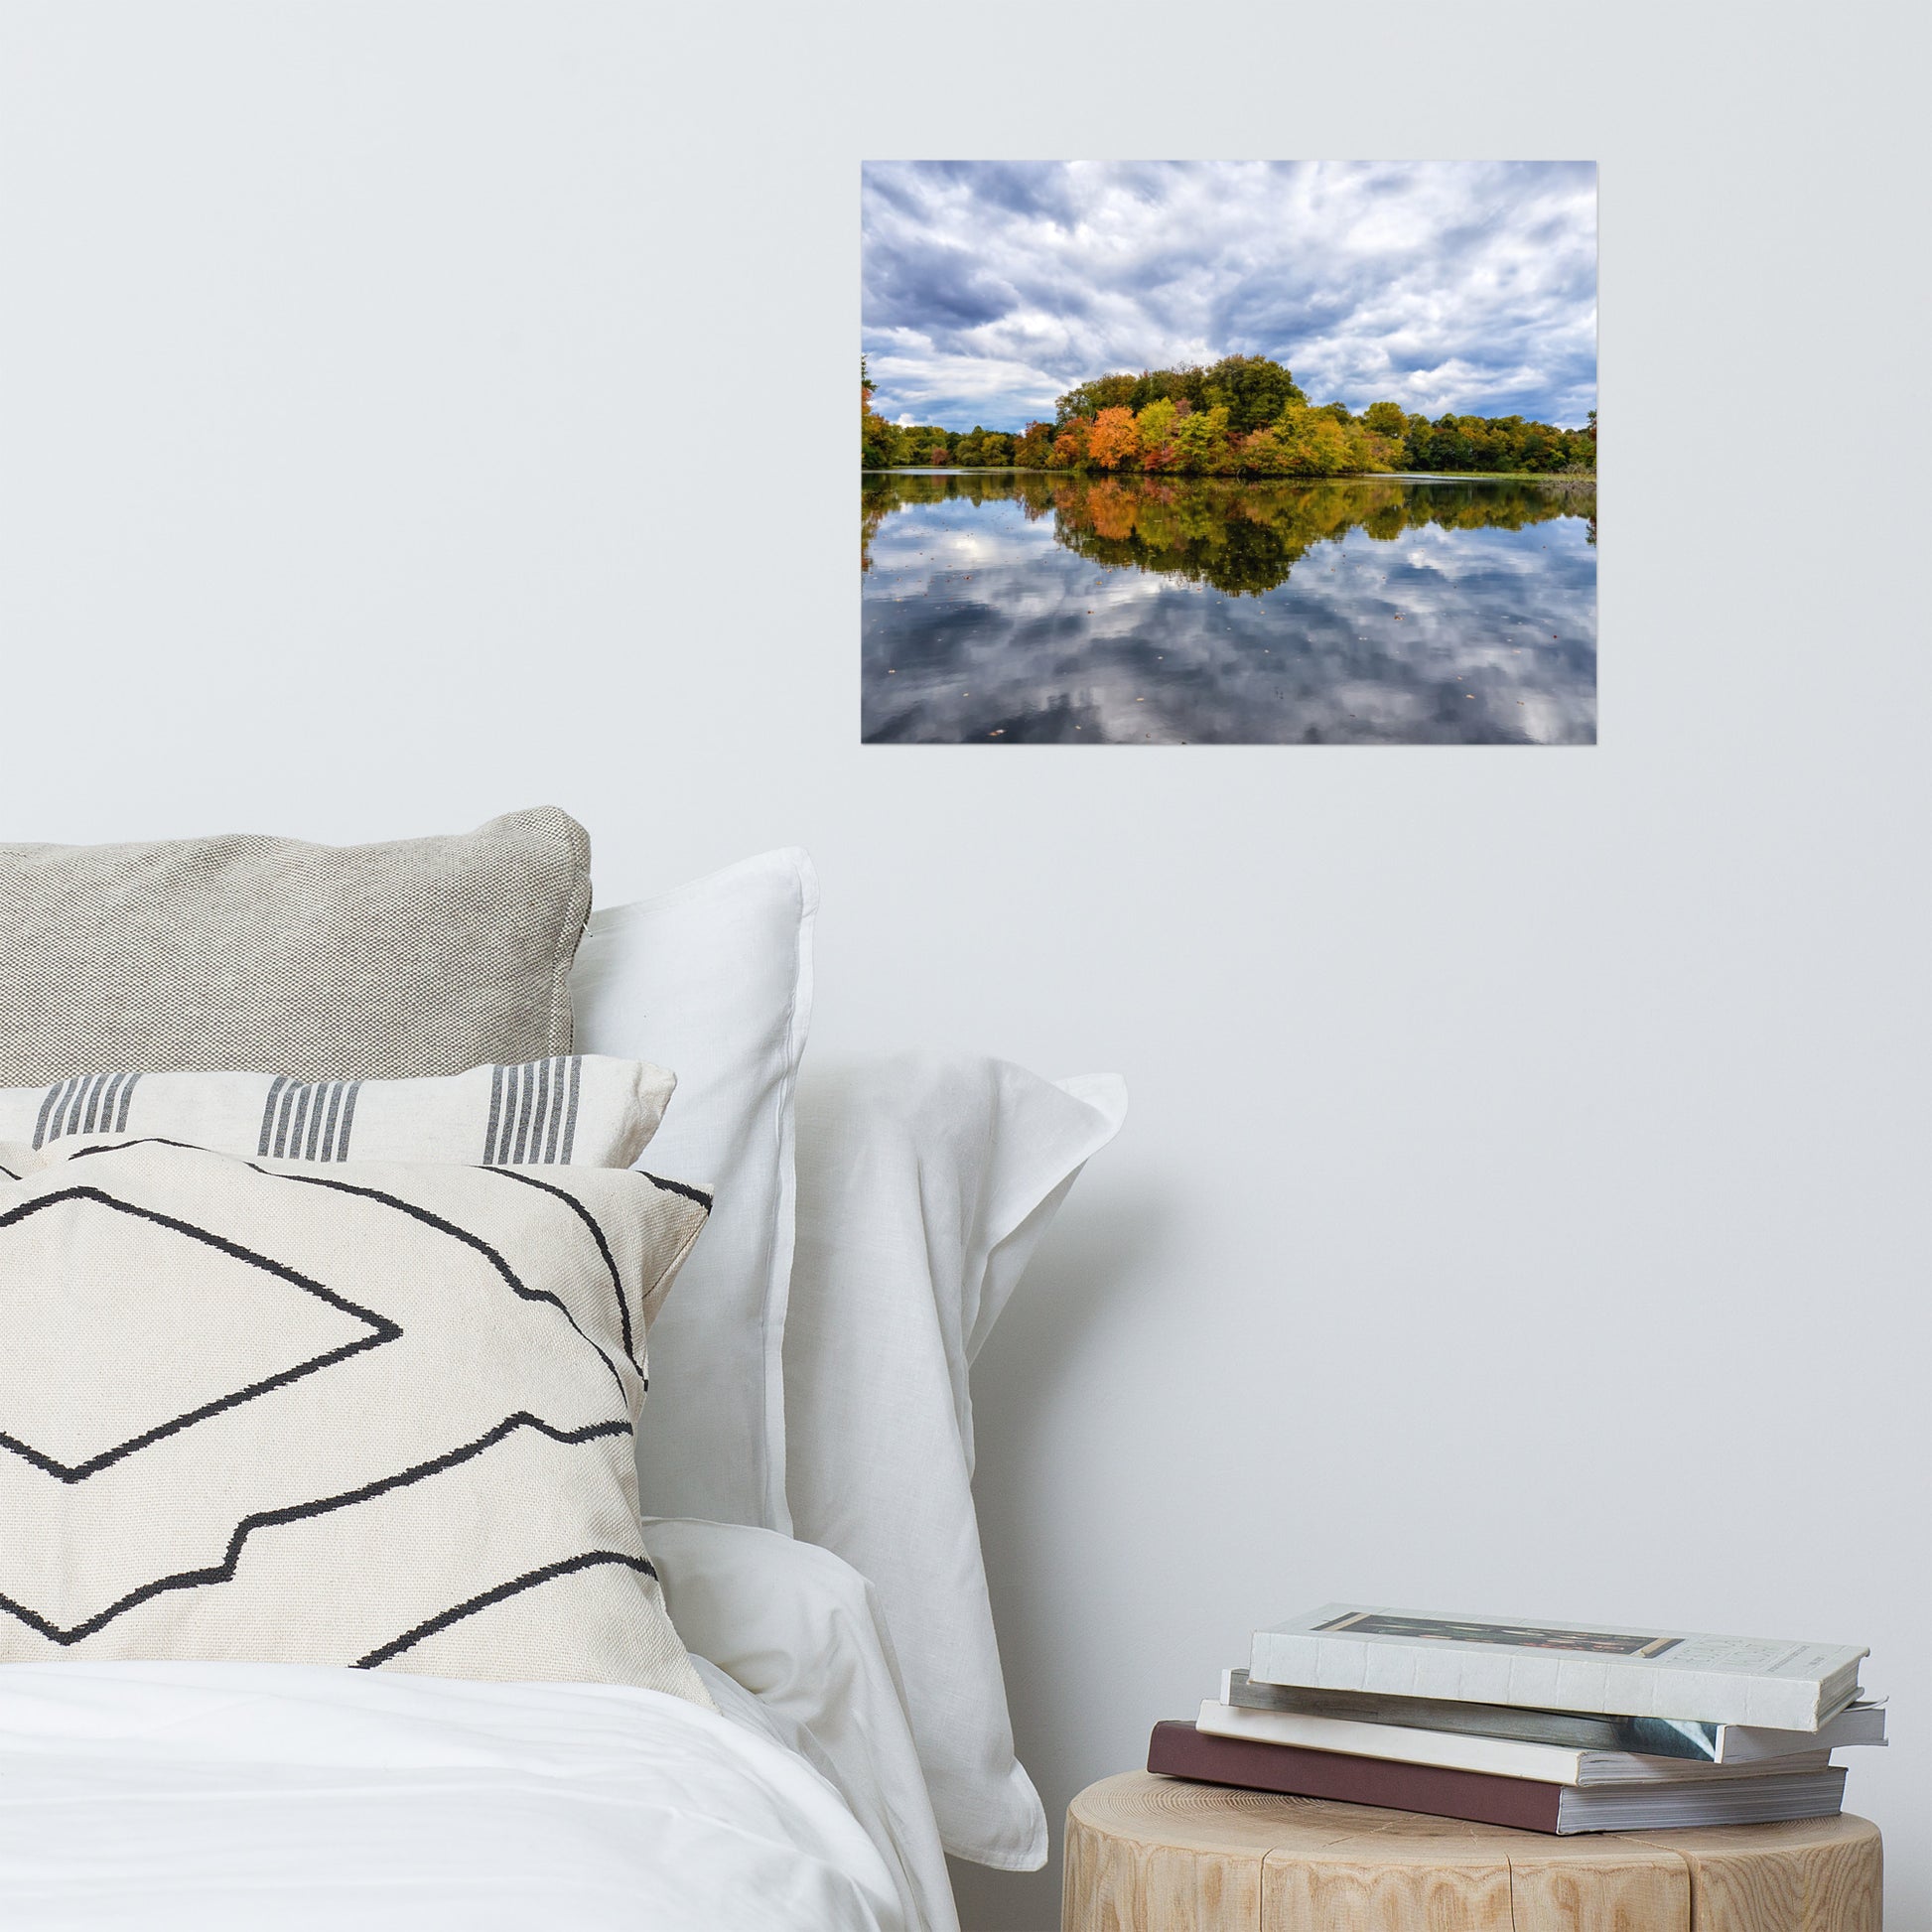 Spare Bedroom Prints: Fall Trees on Edge of Pond With Stormy Sky - Rustic / Rural / Country Style Landscape / Nature Loose / Unframed / Frameless / Frameable Photograph Wall Art Print - Artwork